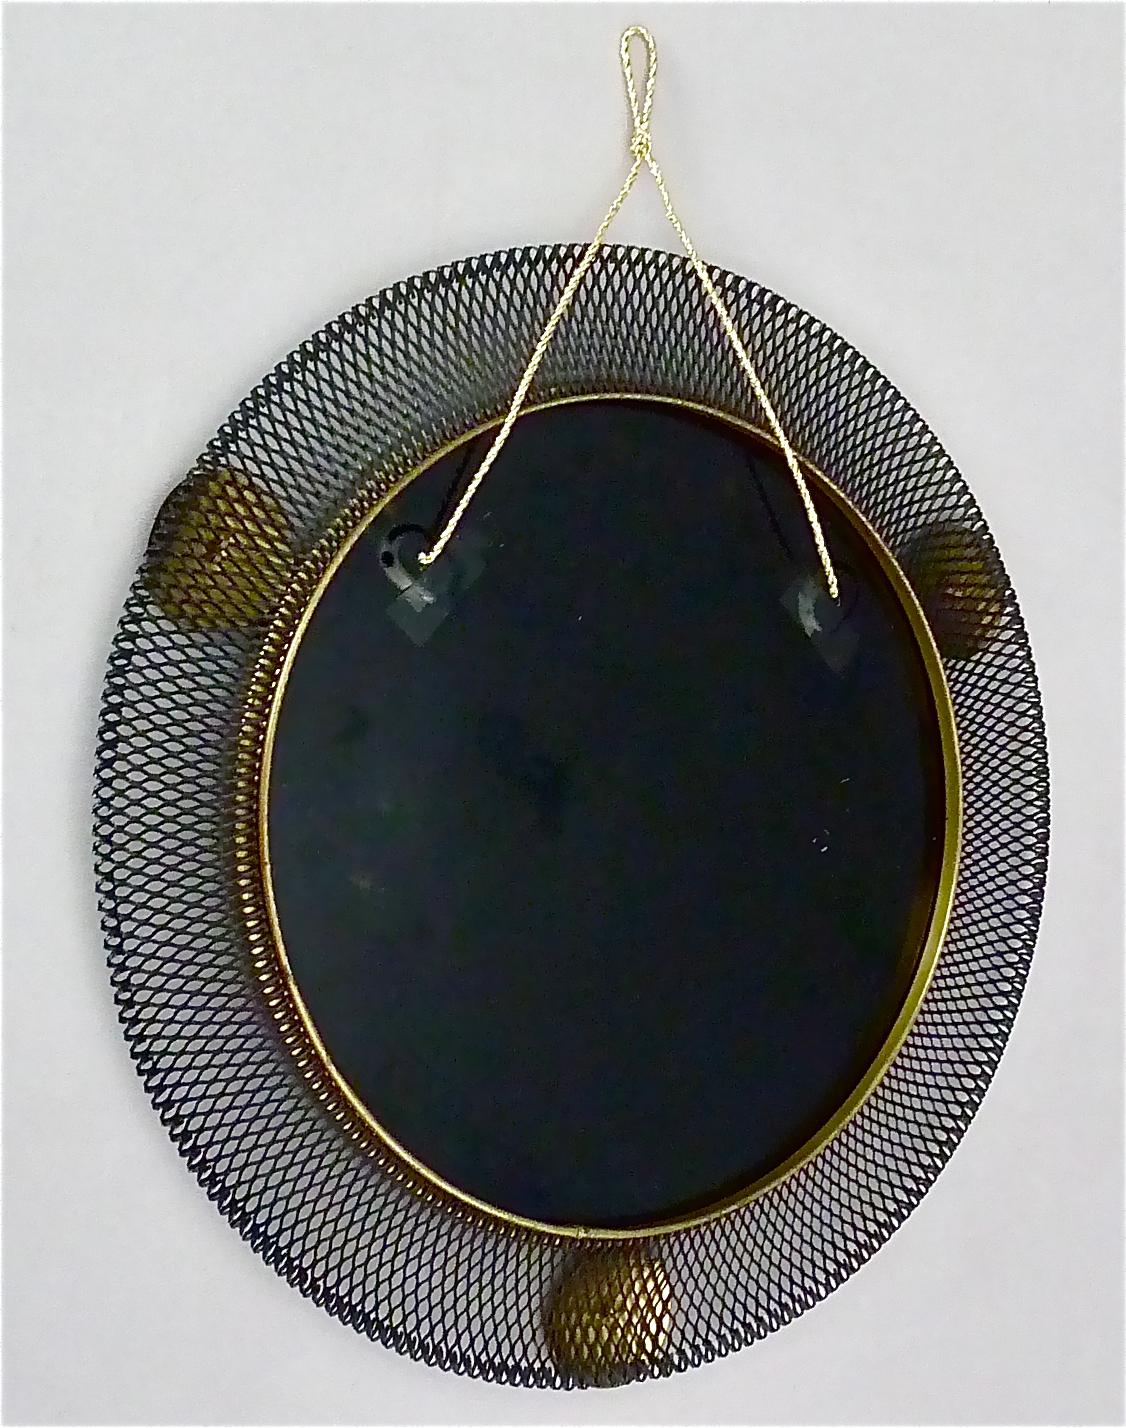 Round Black Midcentury Wall Mirror Brass Stretched Metal 1955 Mategot Biny Style For Sale 6